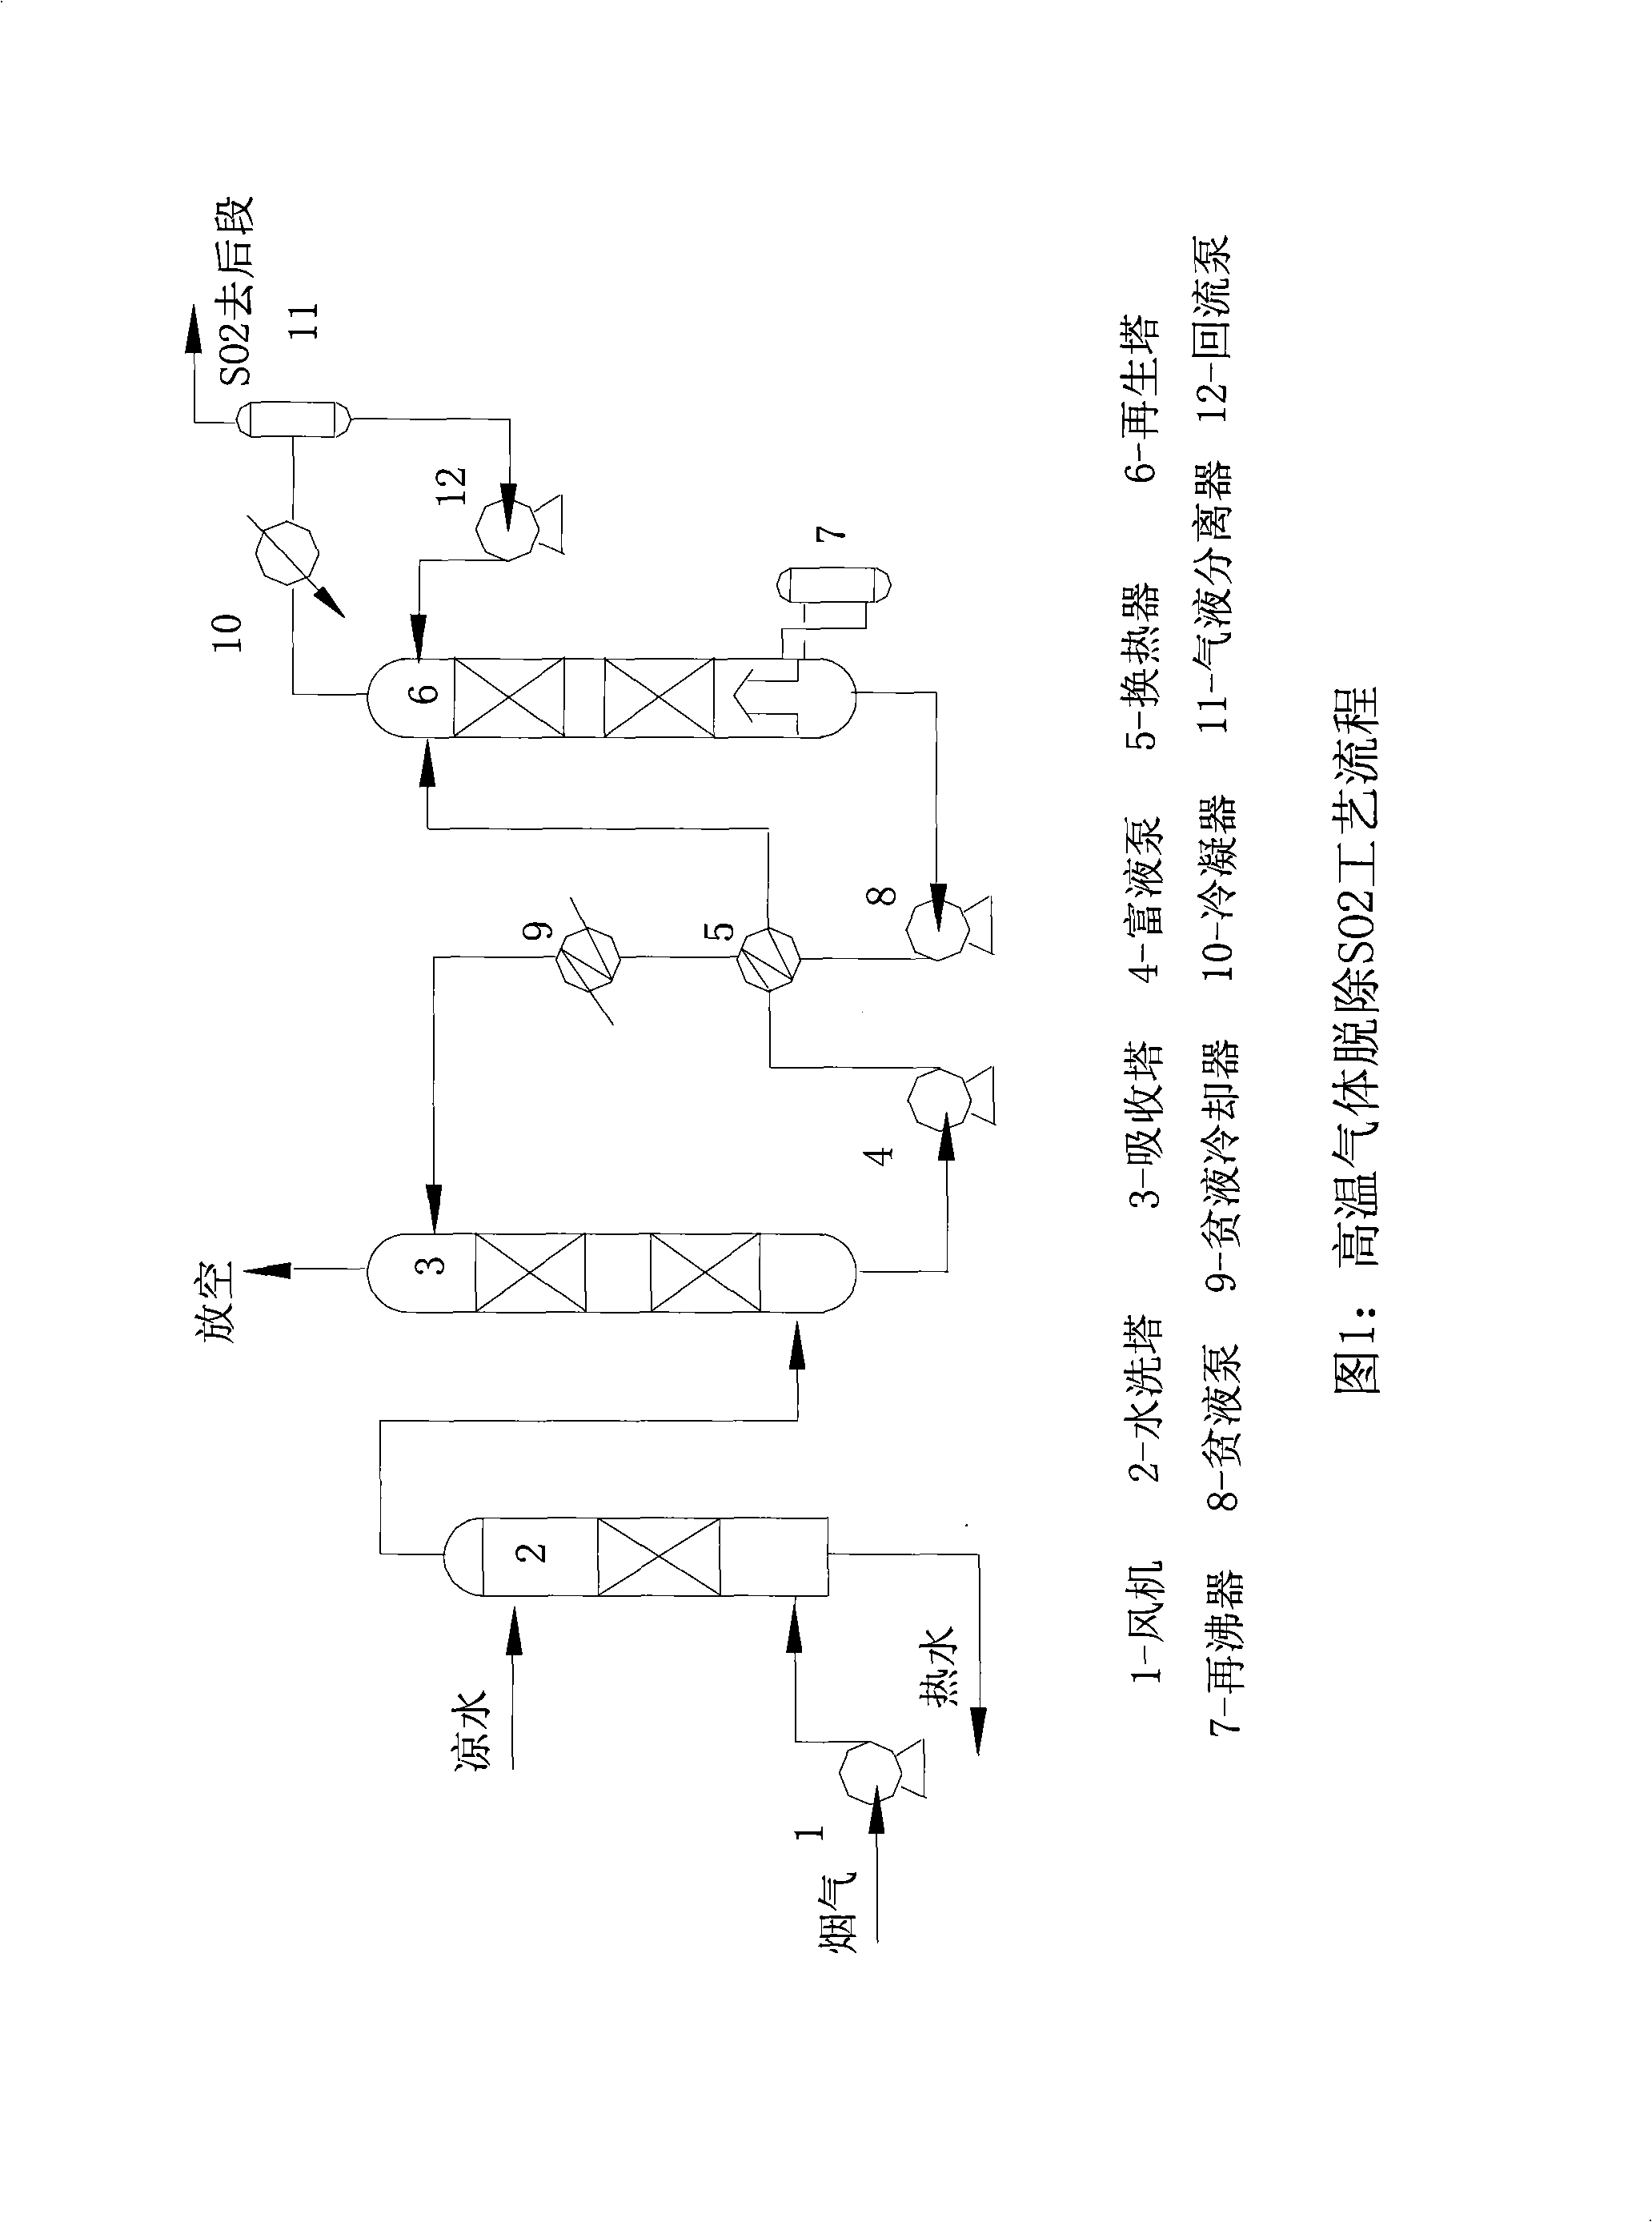 Absorbing agent for removing and recovering sulfur dioxide from gaseous mixture